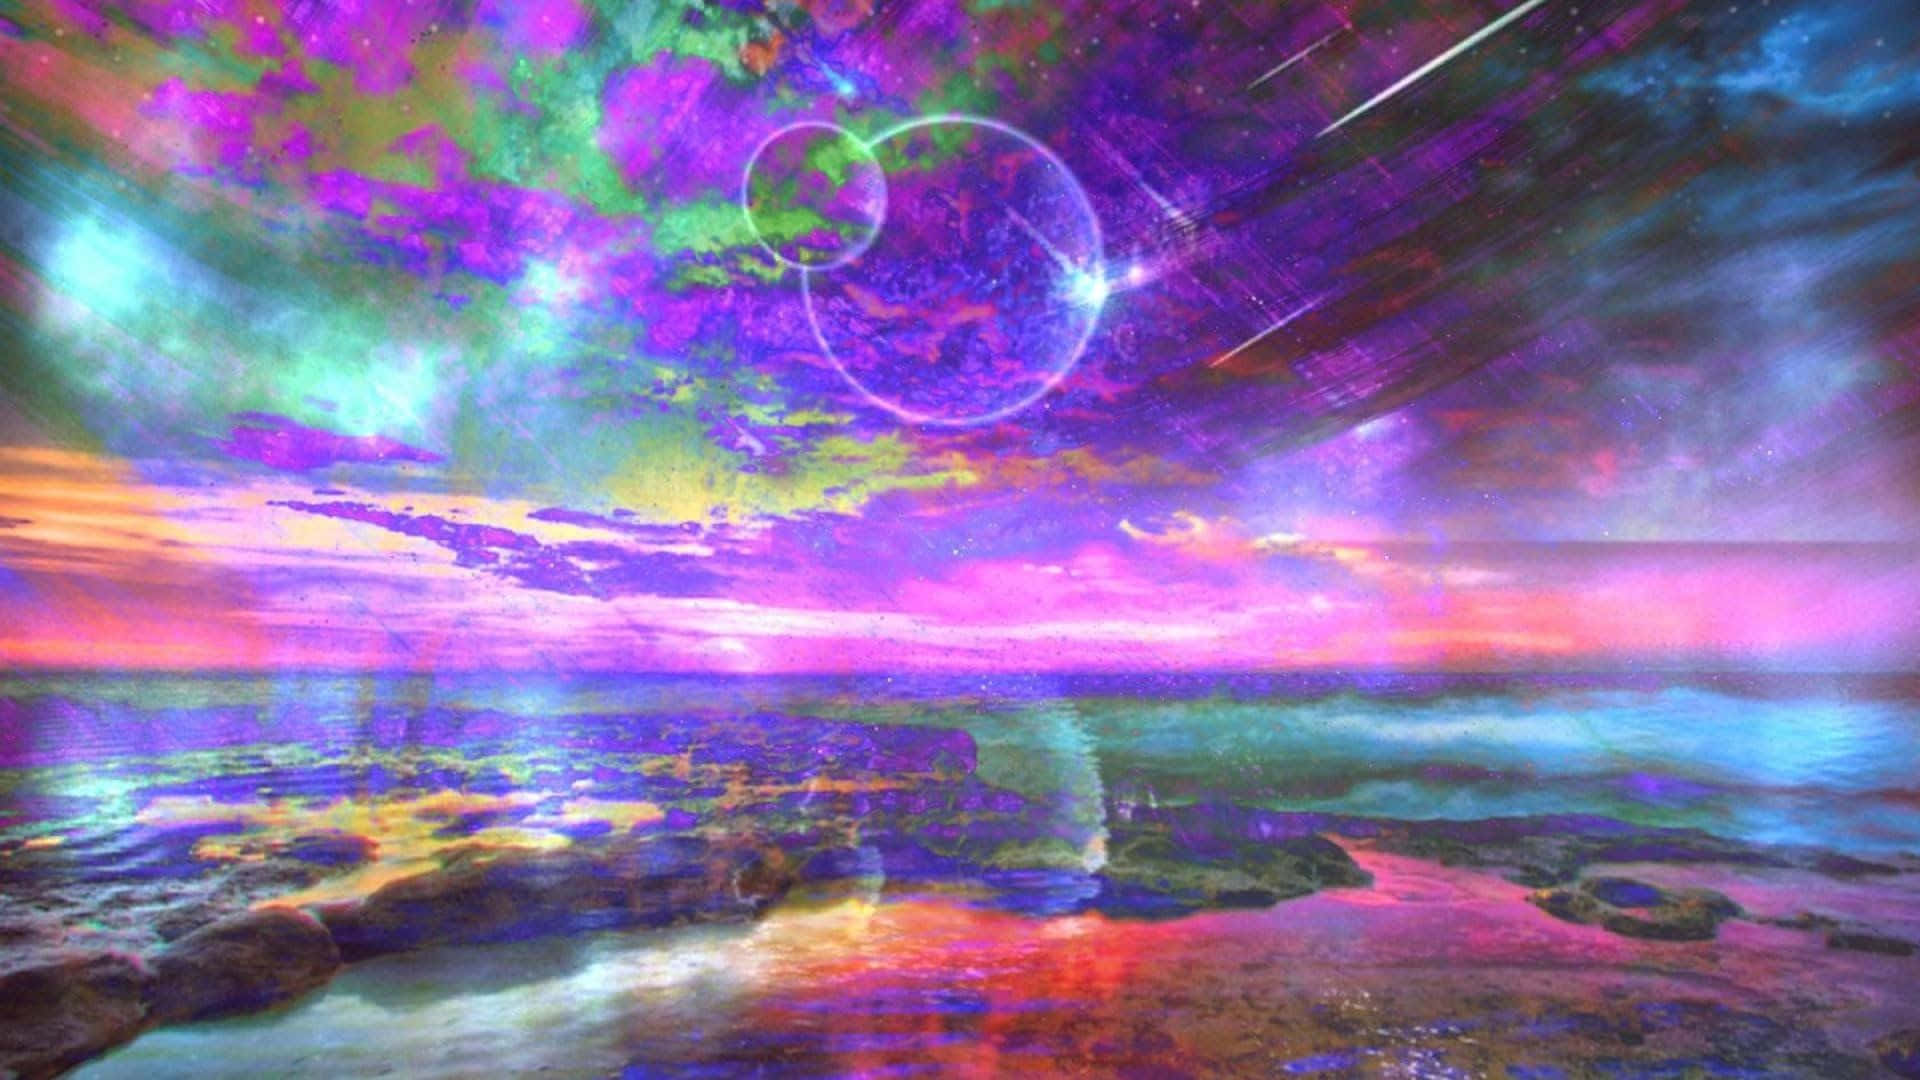 Caption: Surreal Skyscape - A Mesmerizing Fusion of Colors Wallpaper